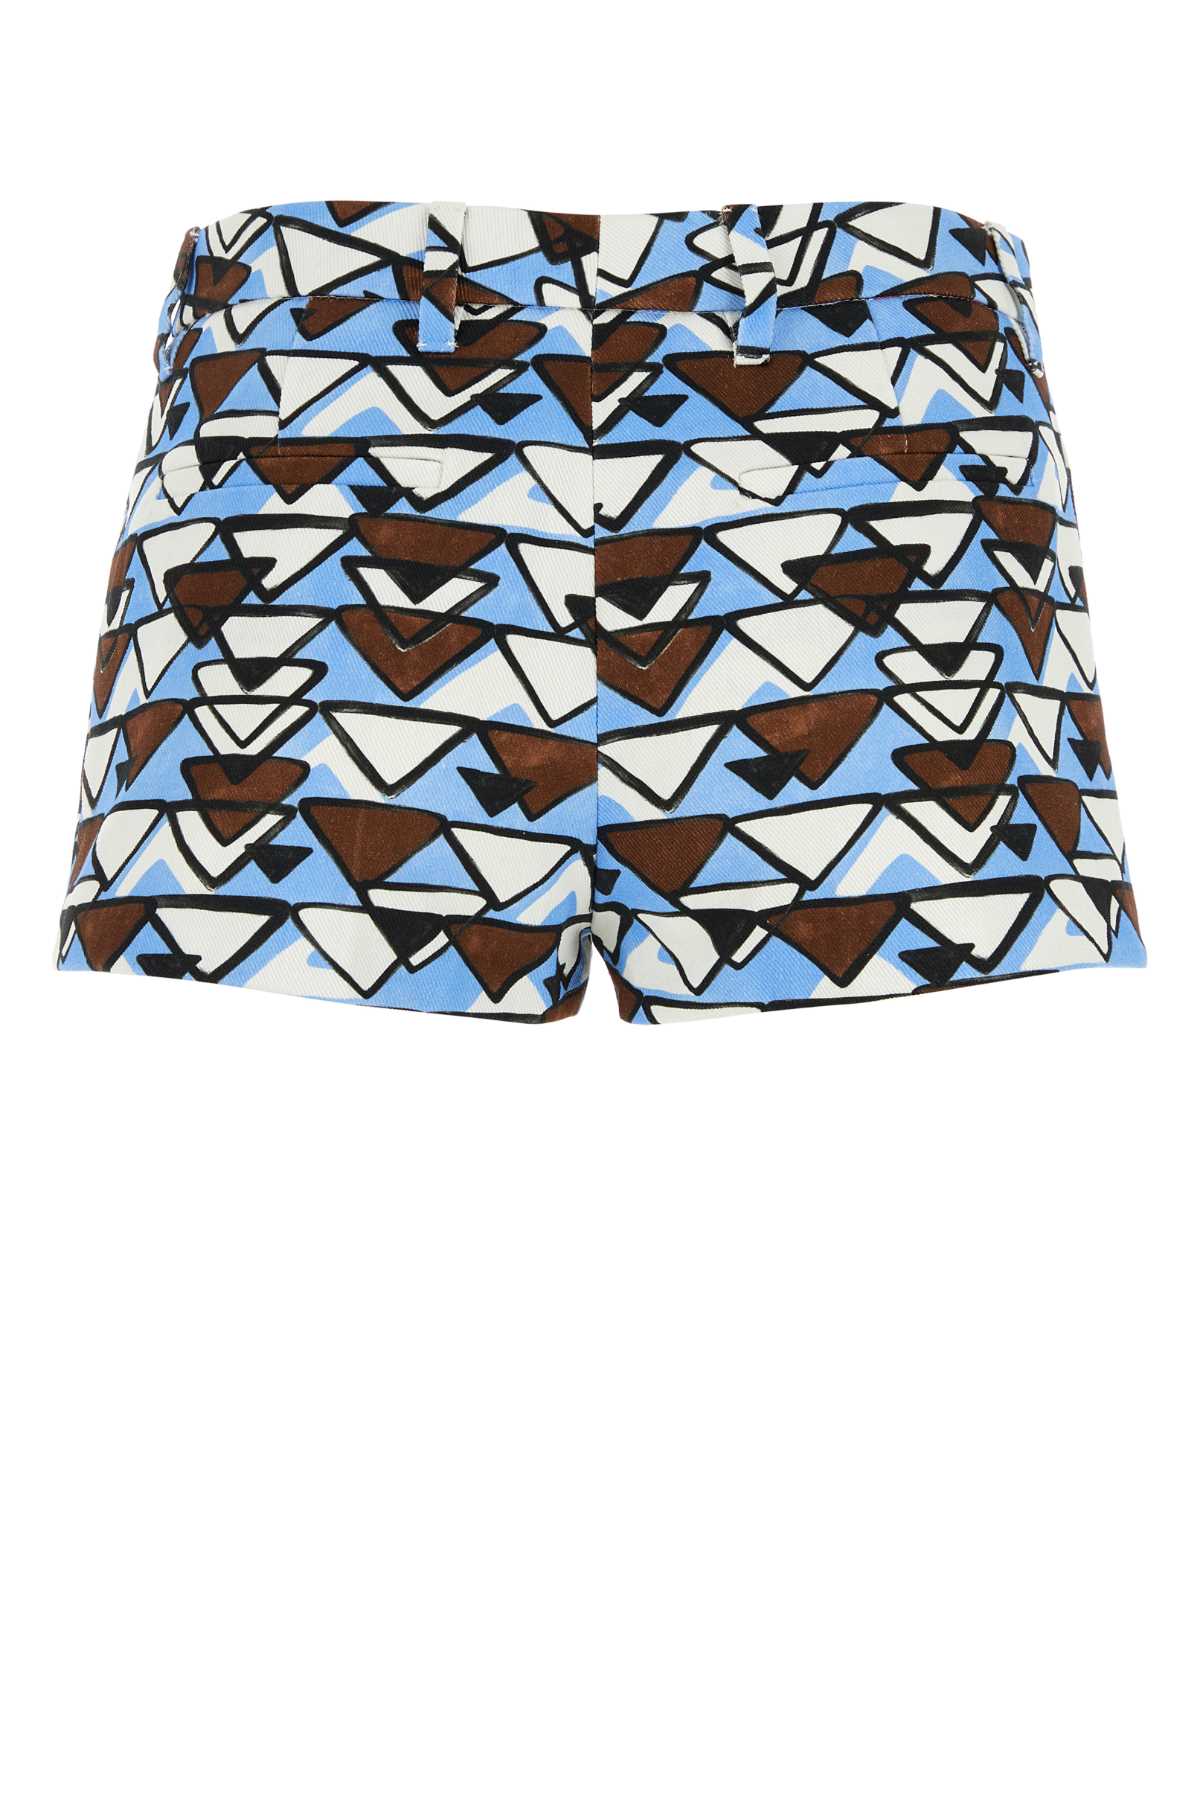 Prada Embroidered Cotton Shorts In Celestetabacc